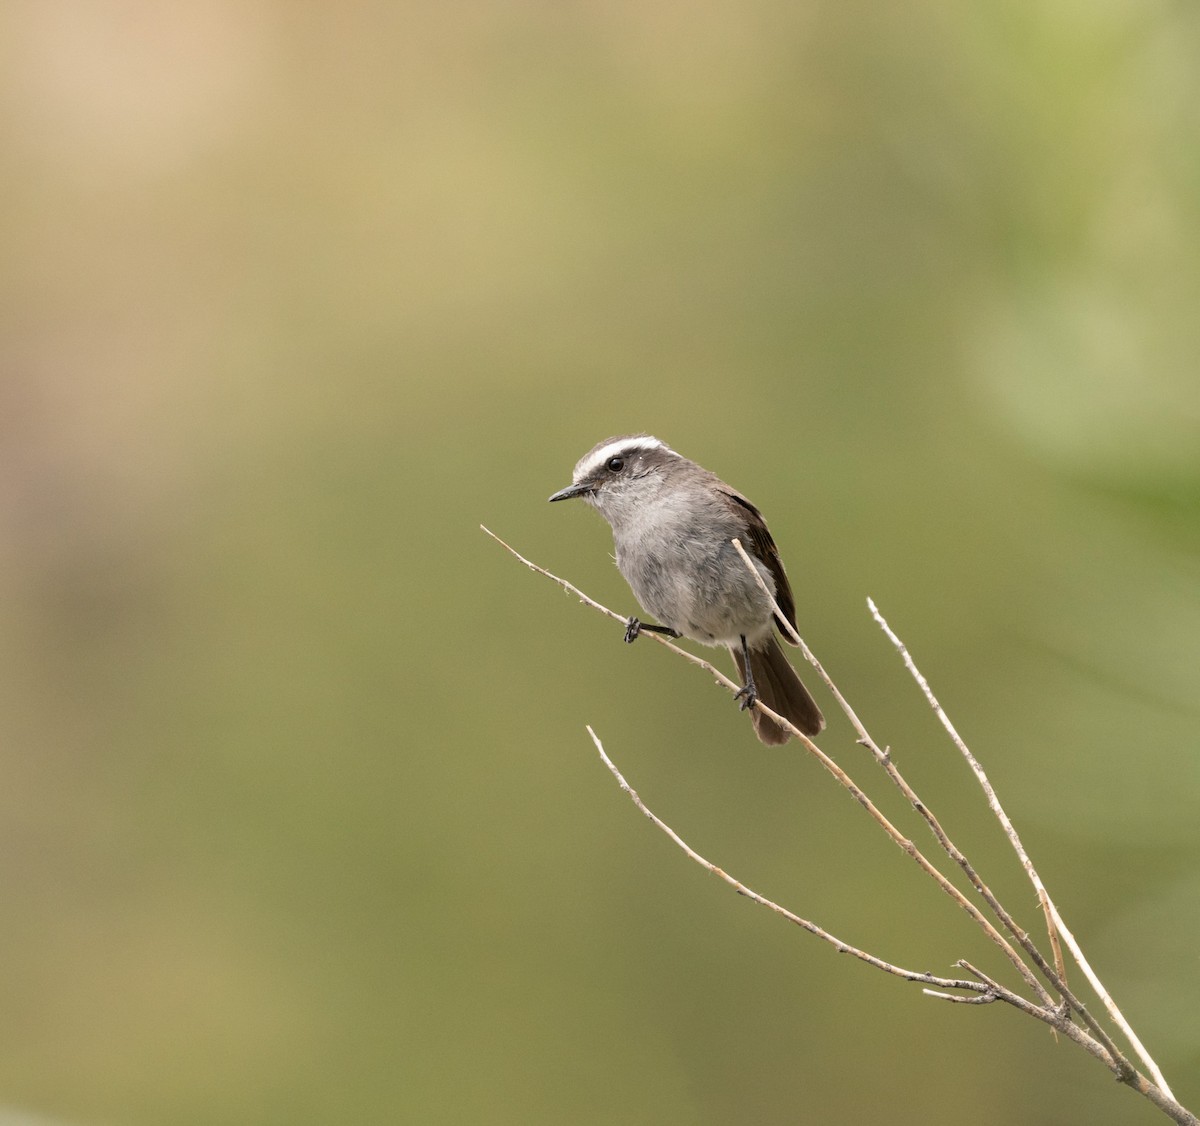 White-browed Chat-Tyrant - Sergio Jaque Bopp